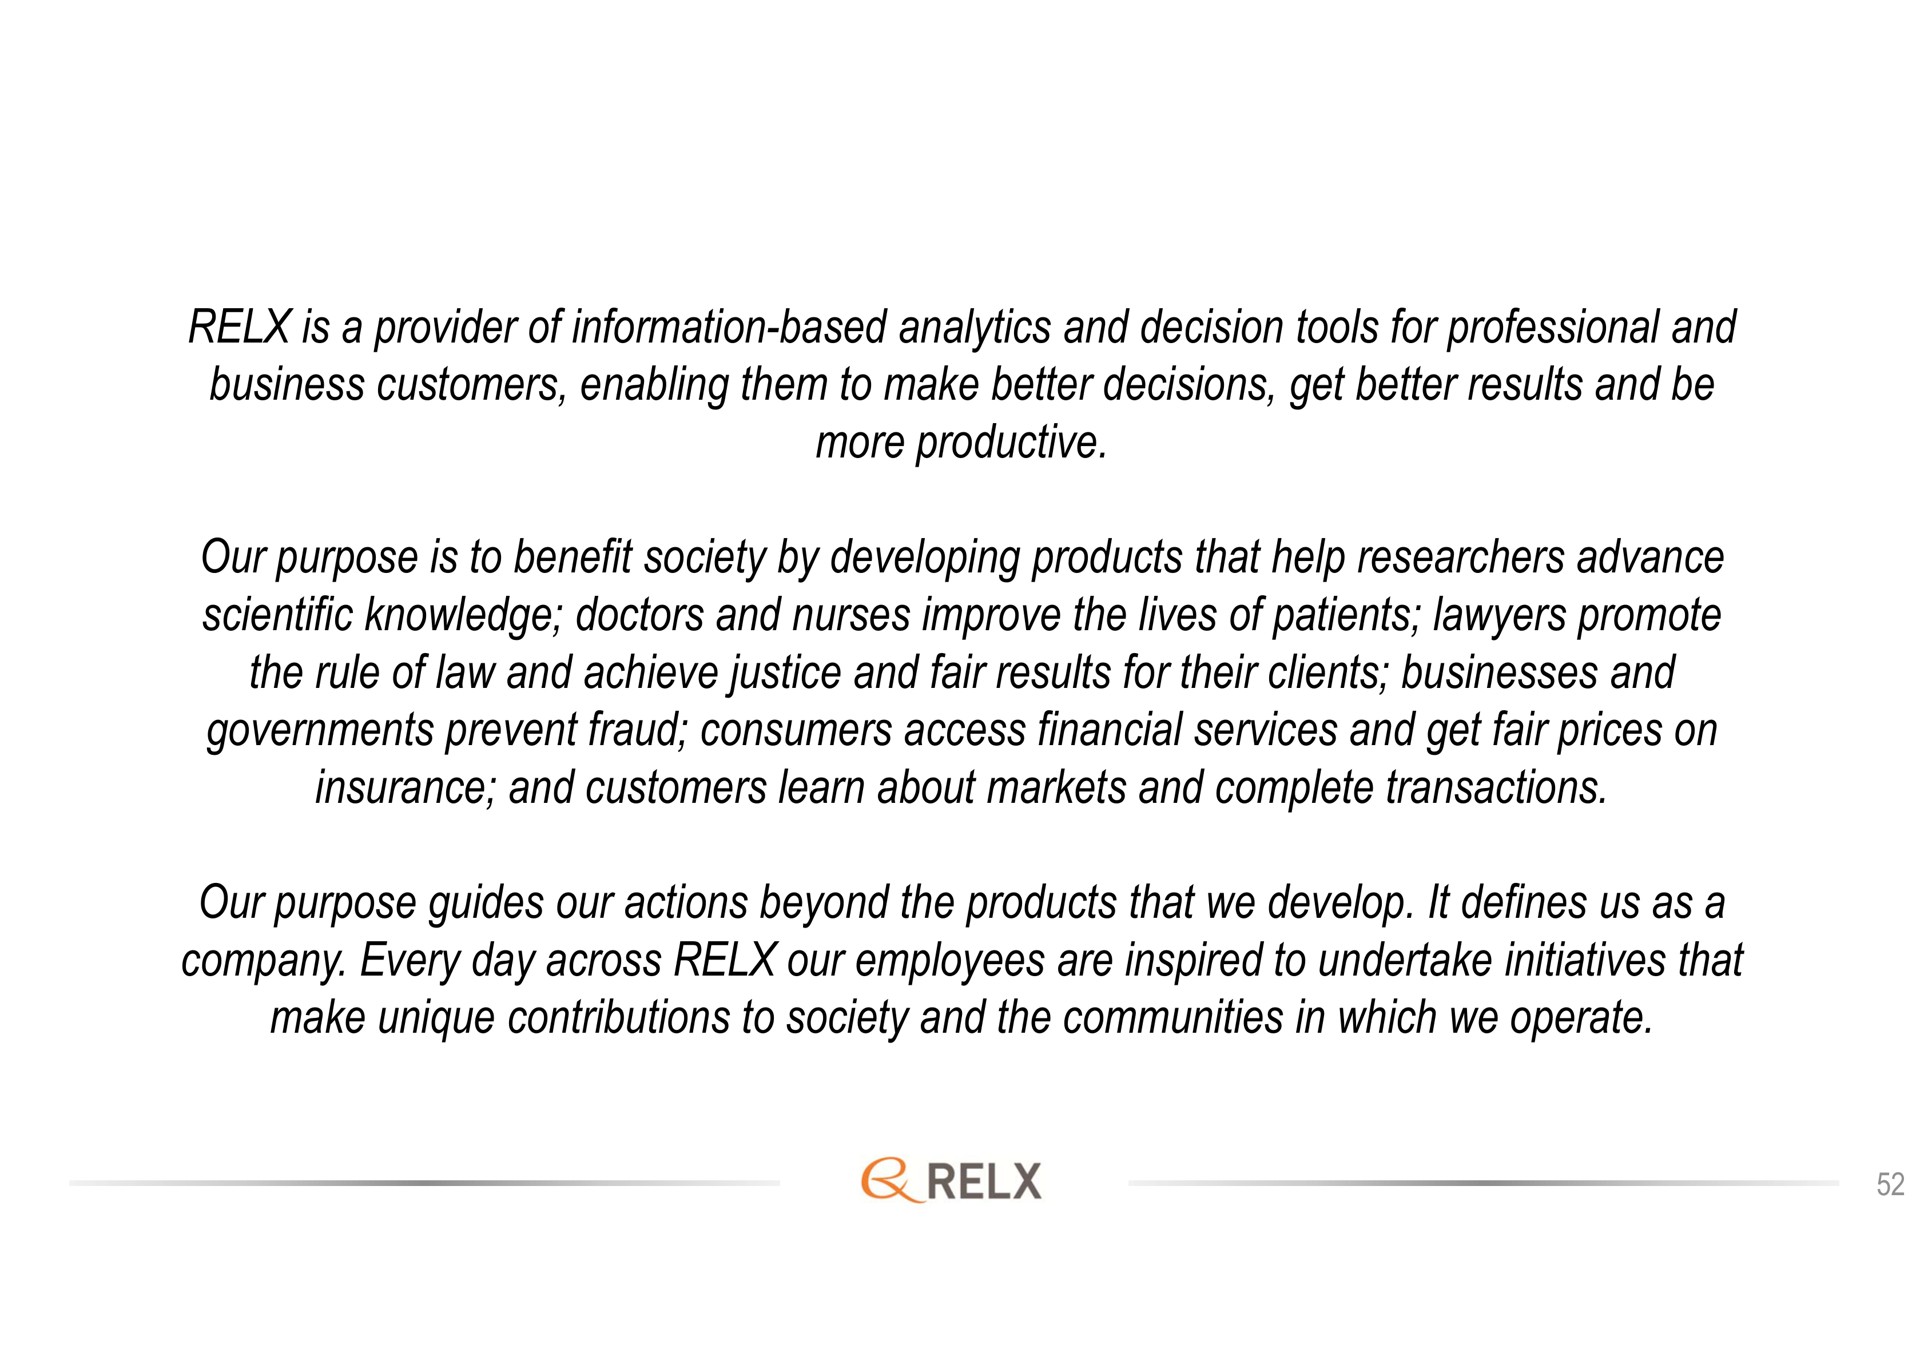 is a provider of information based analytics and decision tools for professional and business customers enabling them to make better decisions get better results and be more productive our purpose is to benefit society by developing products that help researchers advance scientific knowledge doctors and nurses improve the lives of patients lawyers promote the rule of law and achieve justice and fair results for their clients businesses and governments prevent fraud consumers access financial services and get fair prices on insurance and customers learn about markets and complete transactions our purpose guides our actions beyond the products that we develop it defines us as a company every day across our employees are inspired to undertake initiatives that make unique contributions to society and the communities in which we operate | RELX